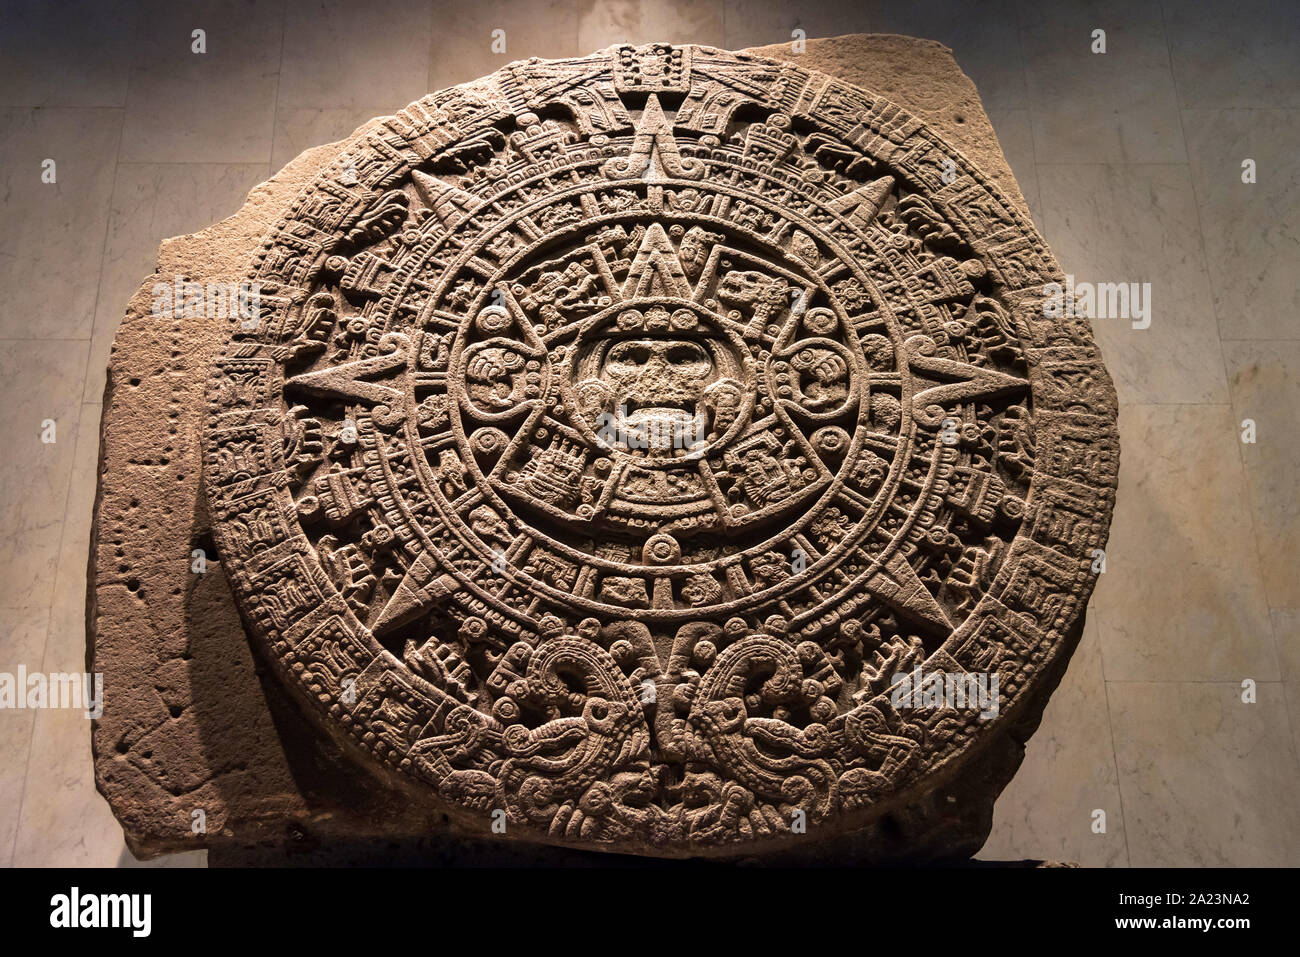 July 24, 2019: Aztec Calendar Stone or Sun Stone, National Museum of Anthropology, Mexico City, Mexico Stock Photo